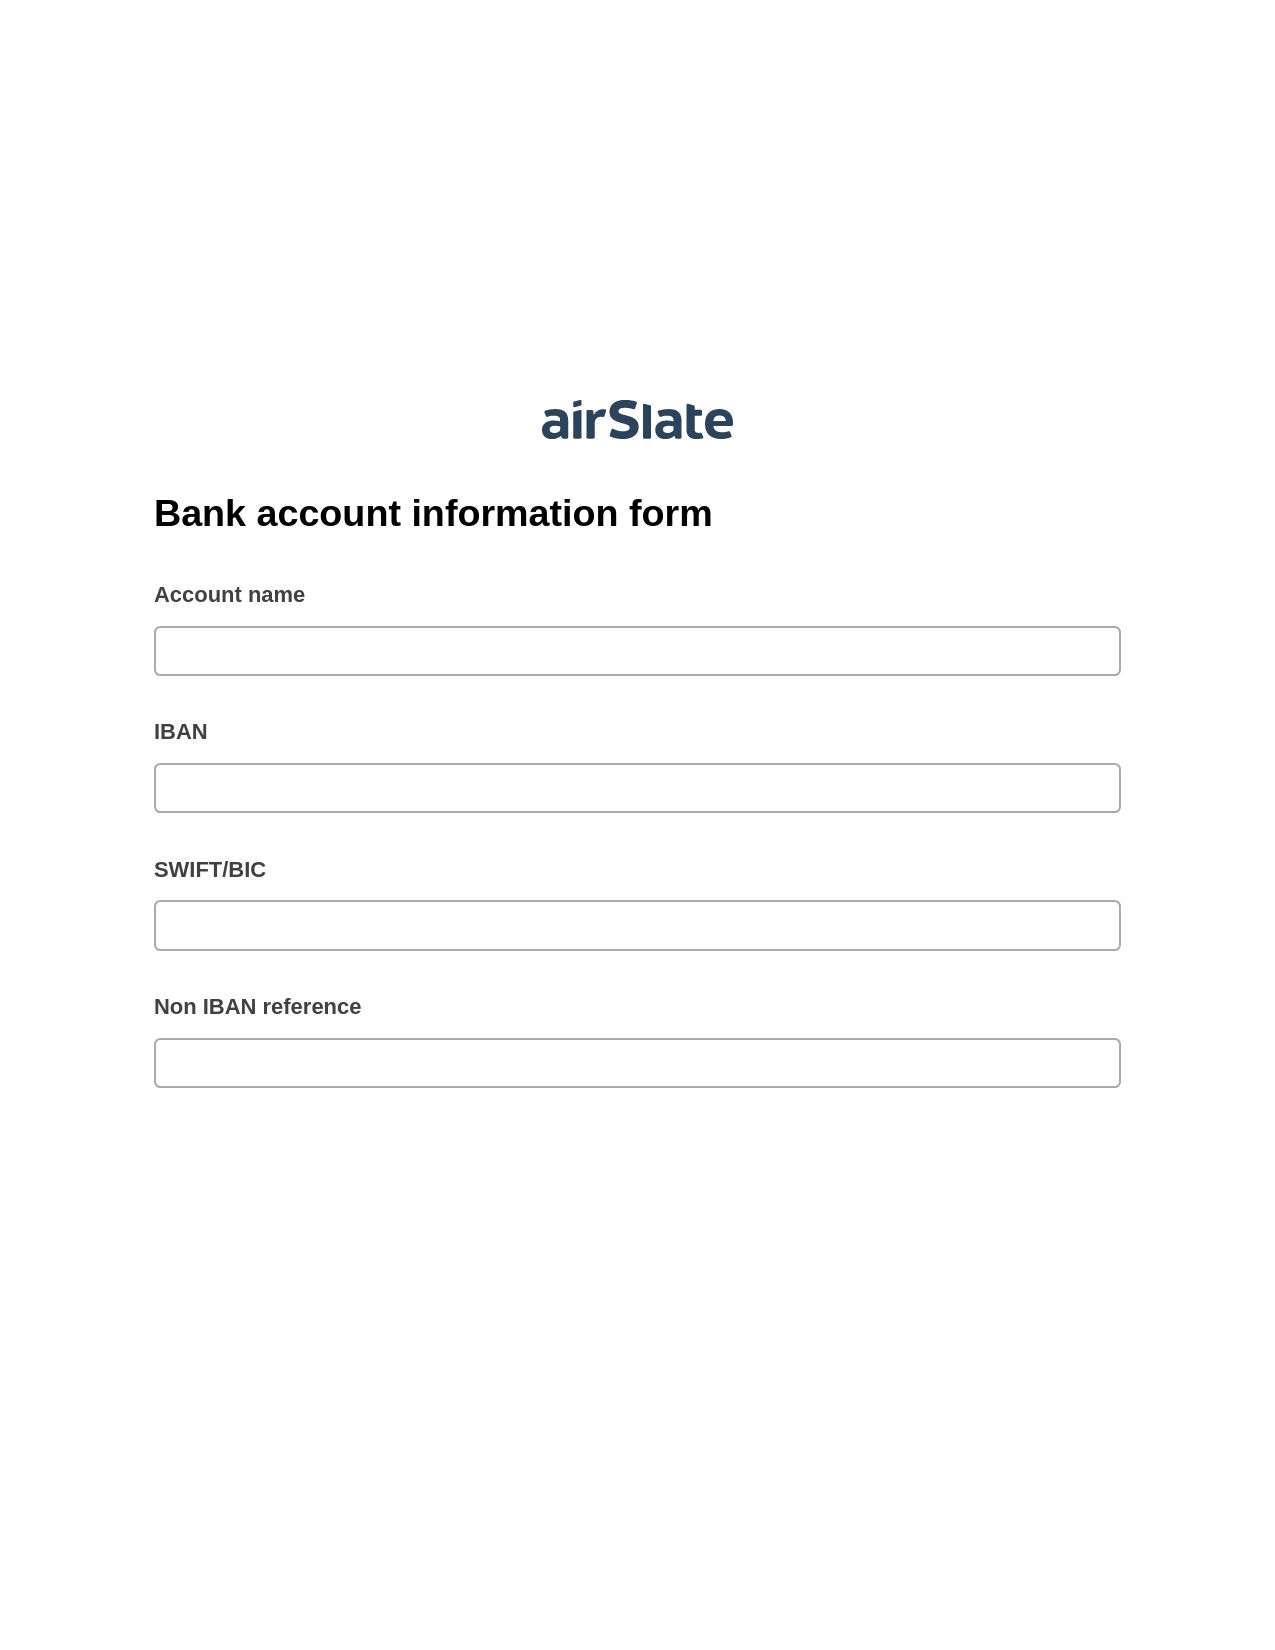 Multirole Bank account information form Pre-fill from MySQL Dropdown Options Bot, Update MS Dynamics 365 Record Bot, Export to NetSuite Record Bot